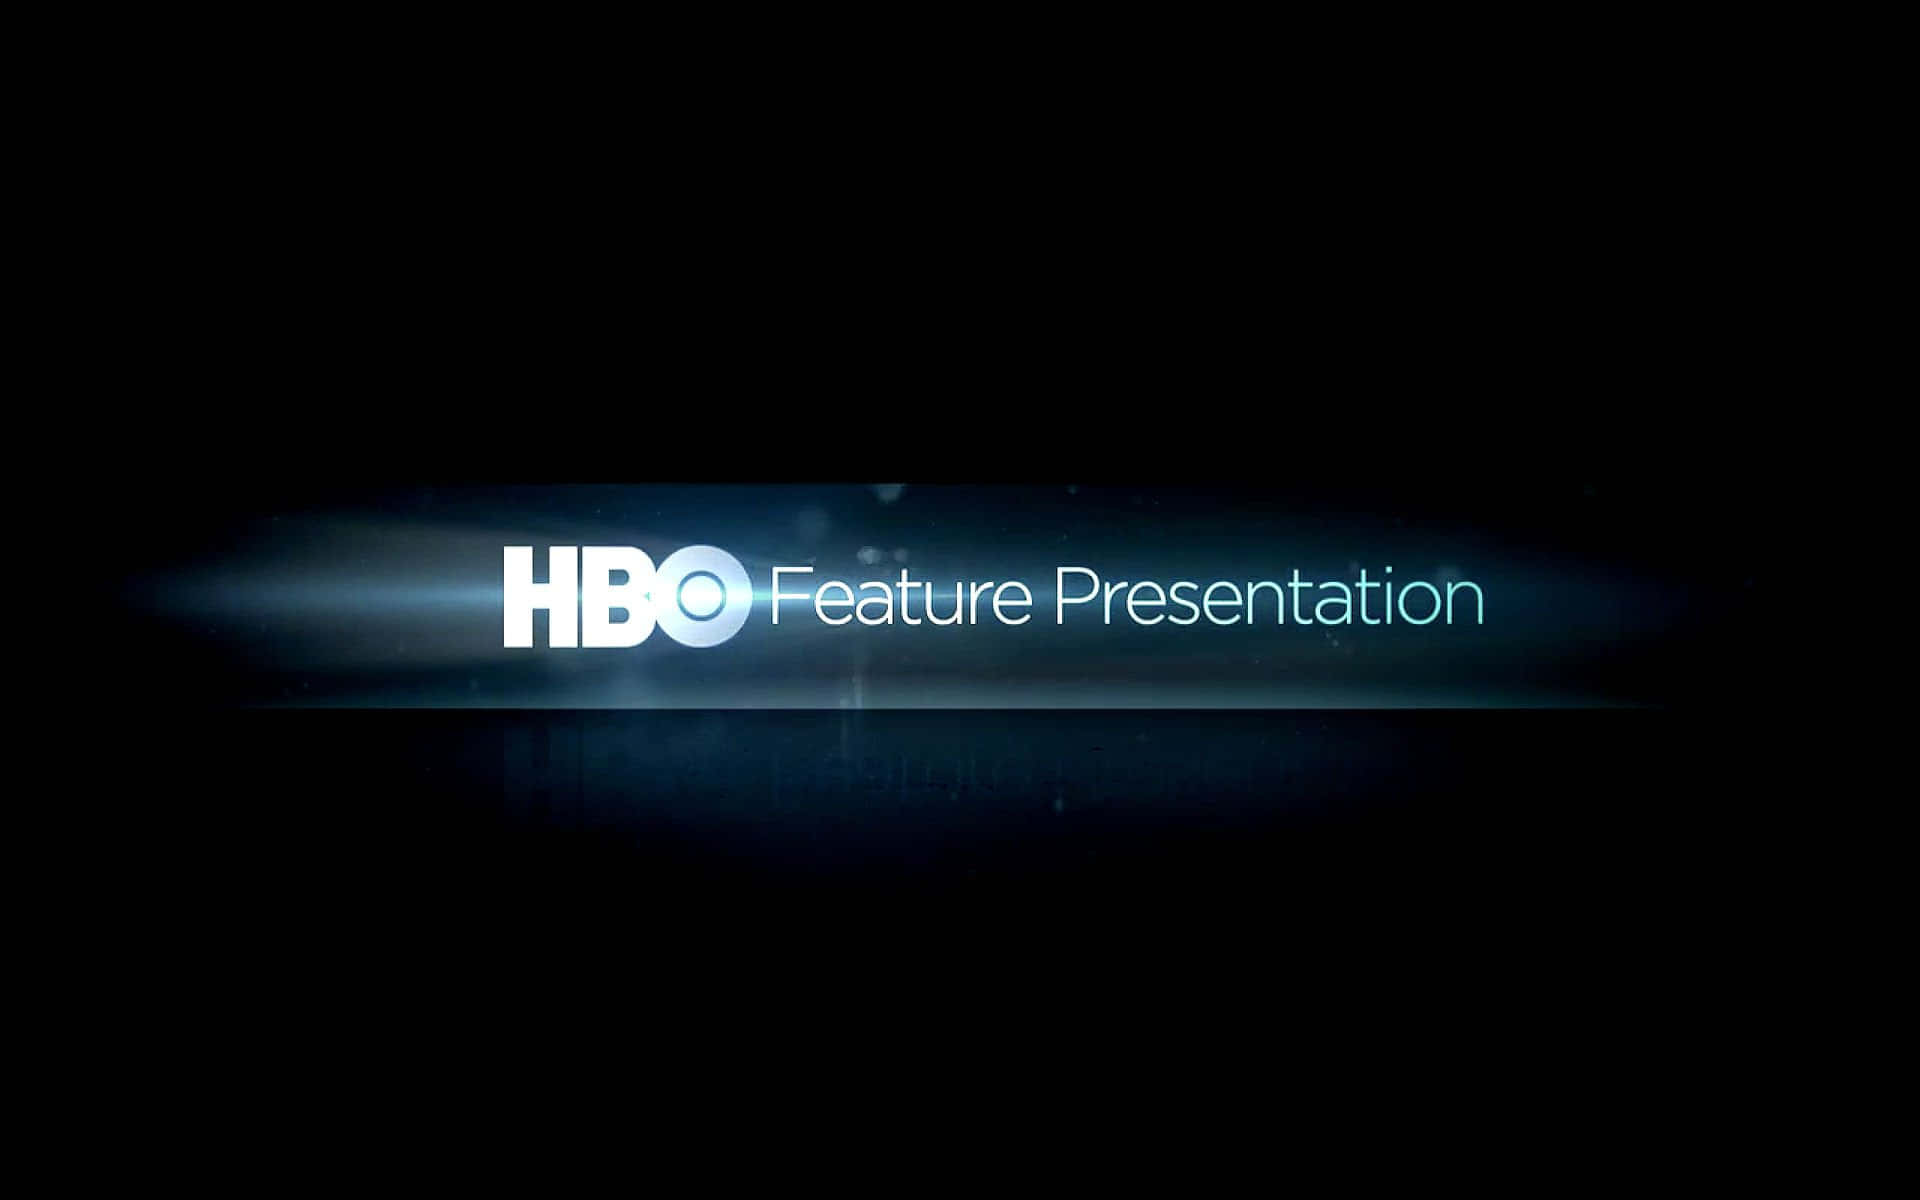 Tune in to HBO for the best entertainment and movies